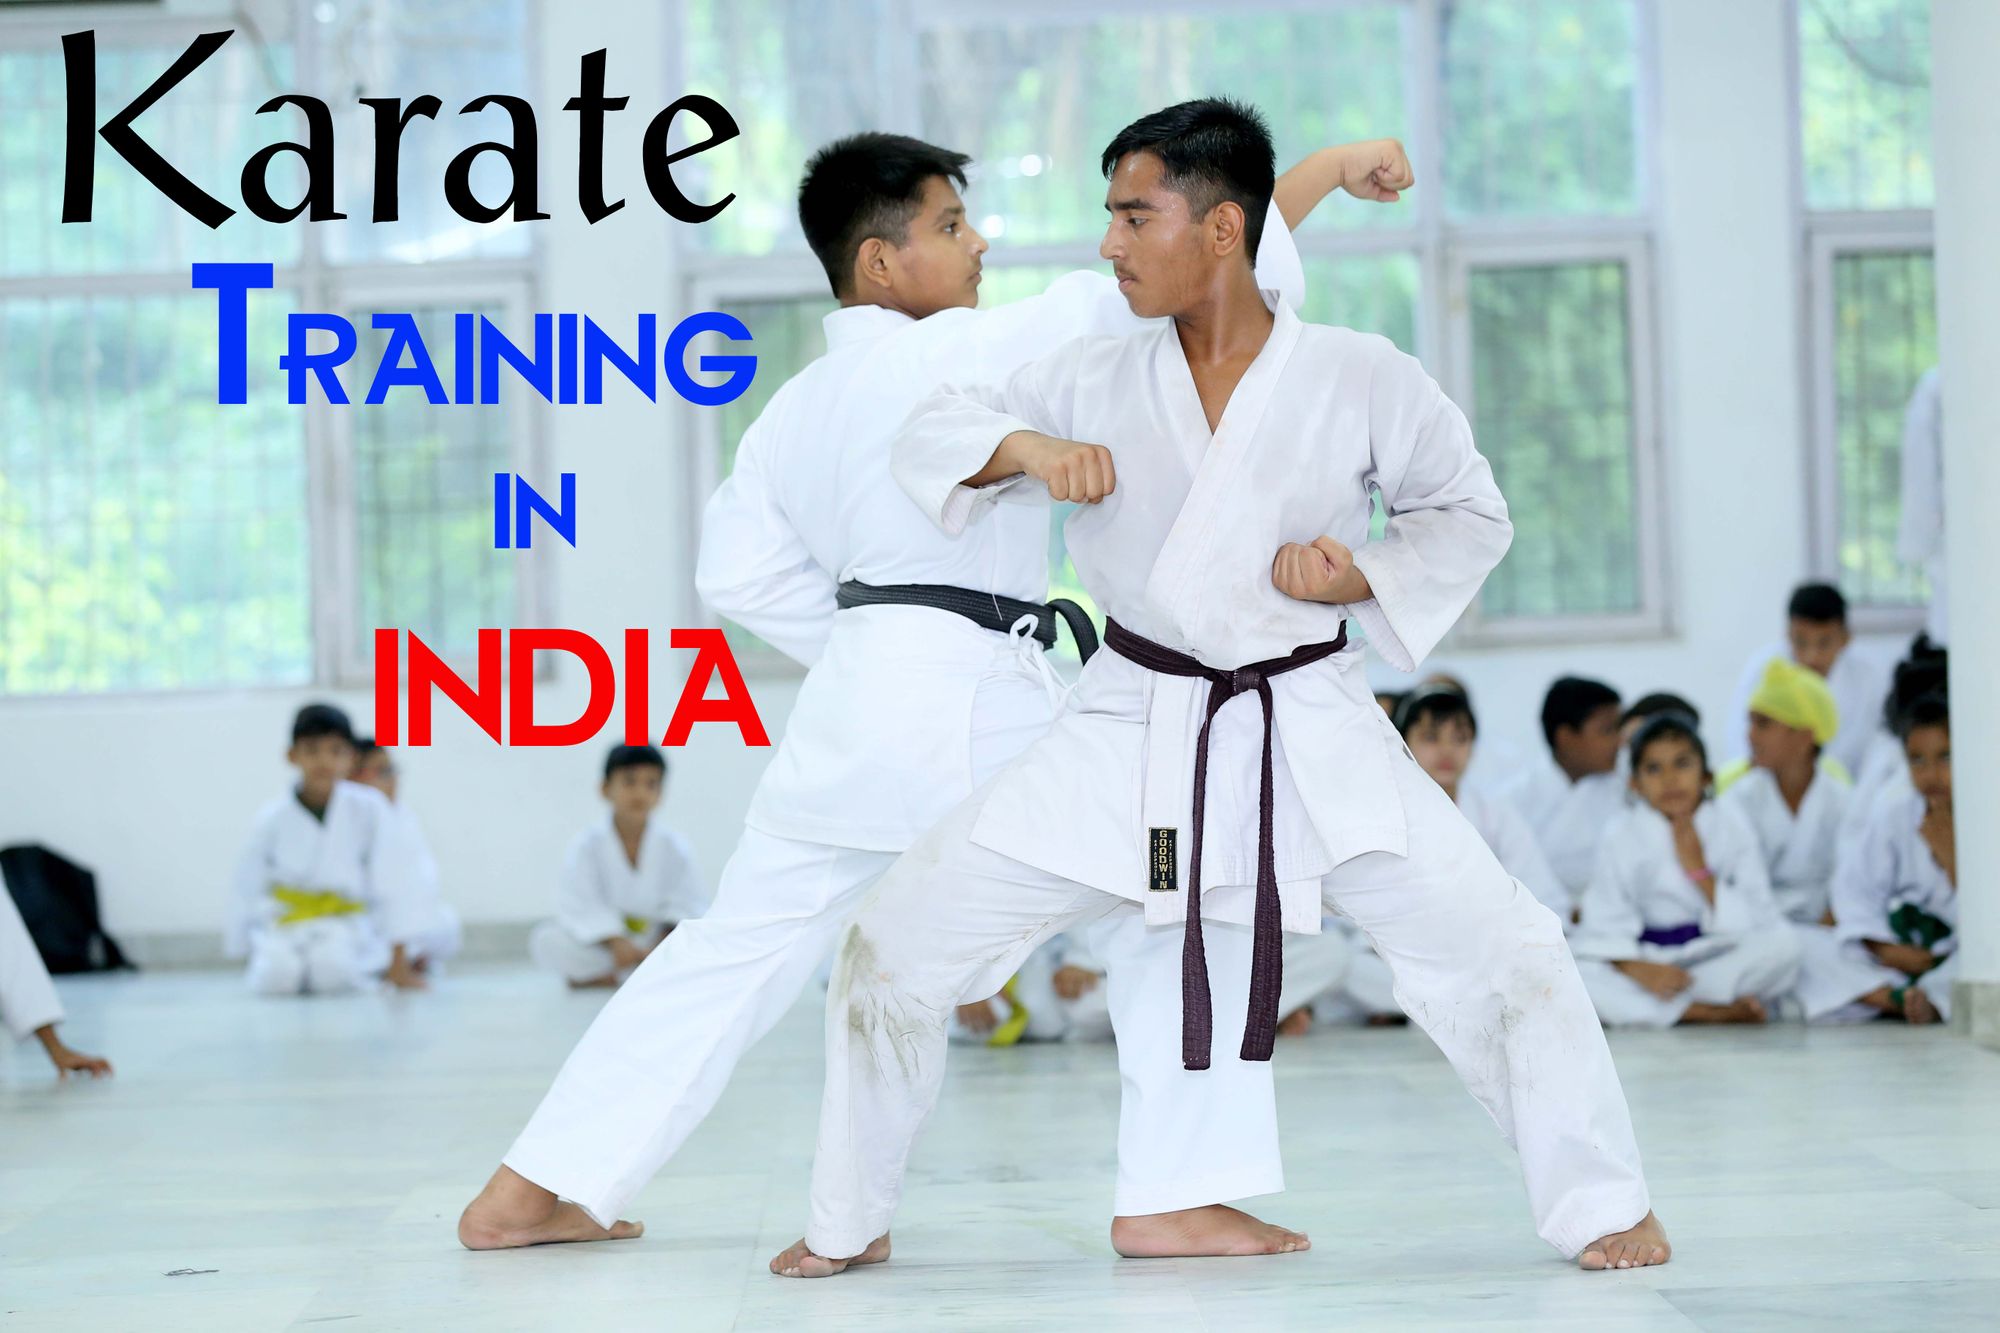 How to decide which karate training in India suits you the most?